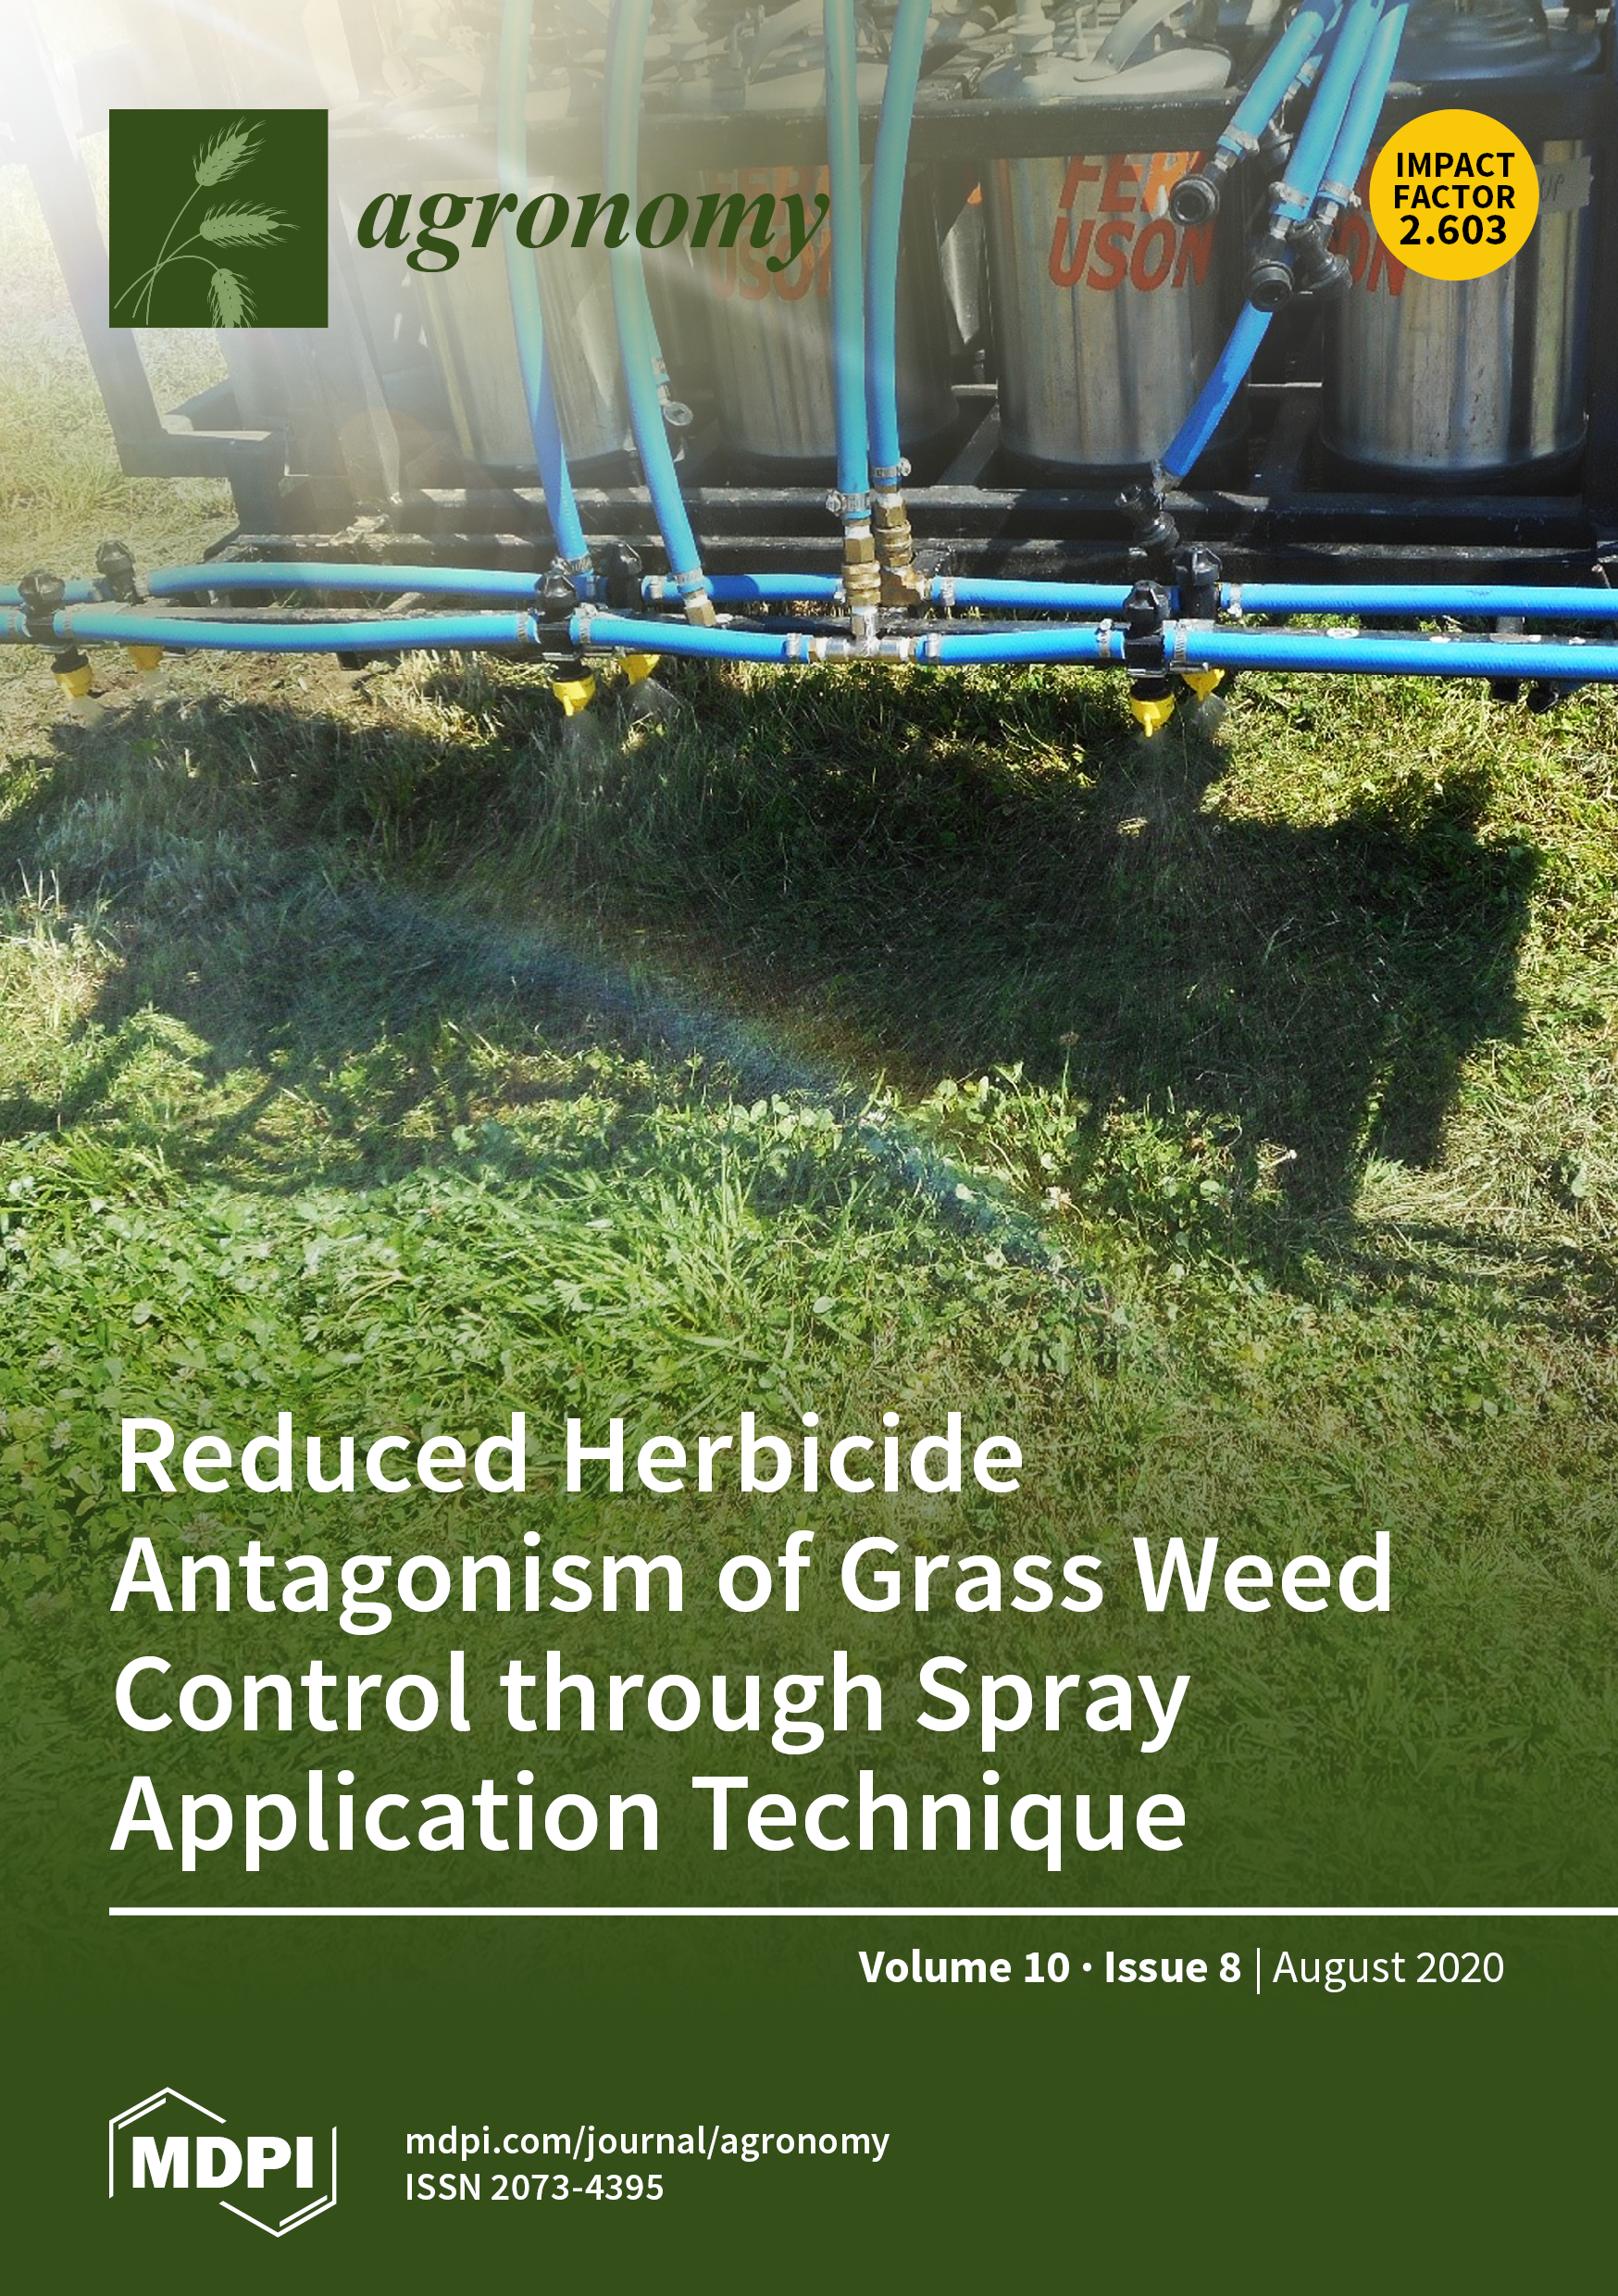 Agronomy August 2020 Browse Articles